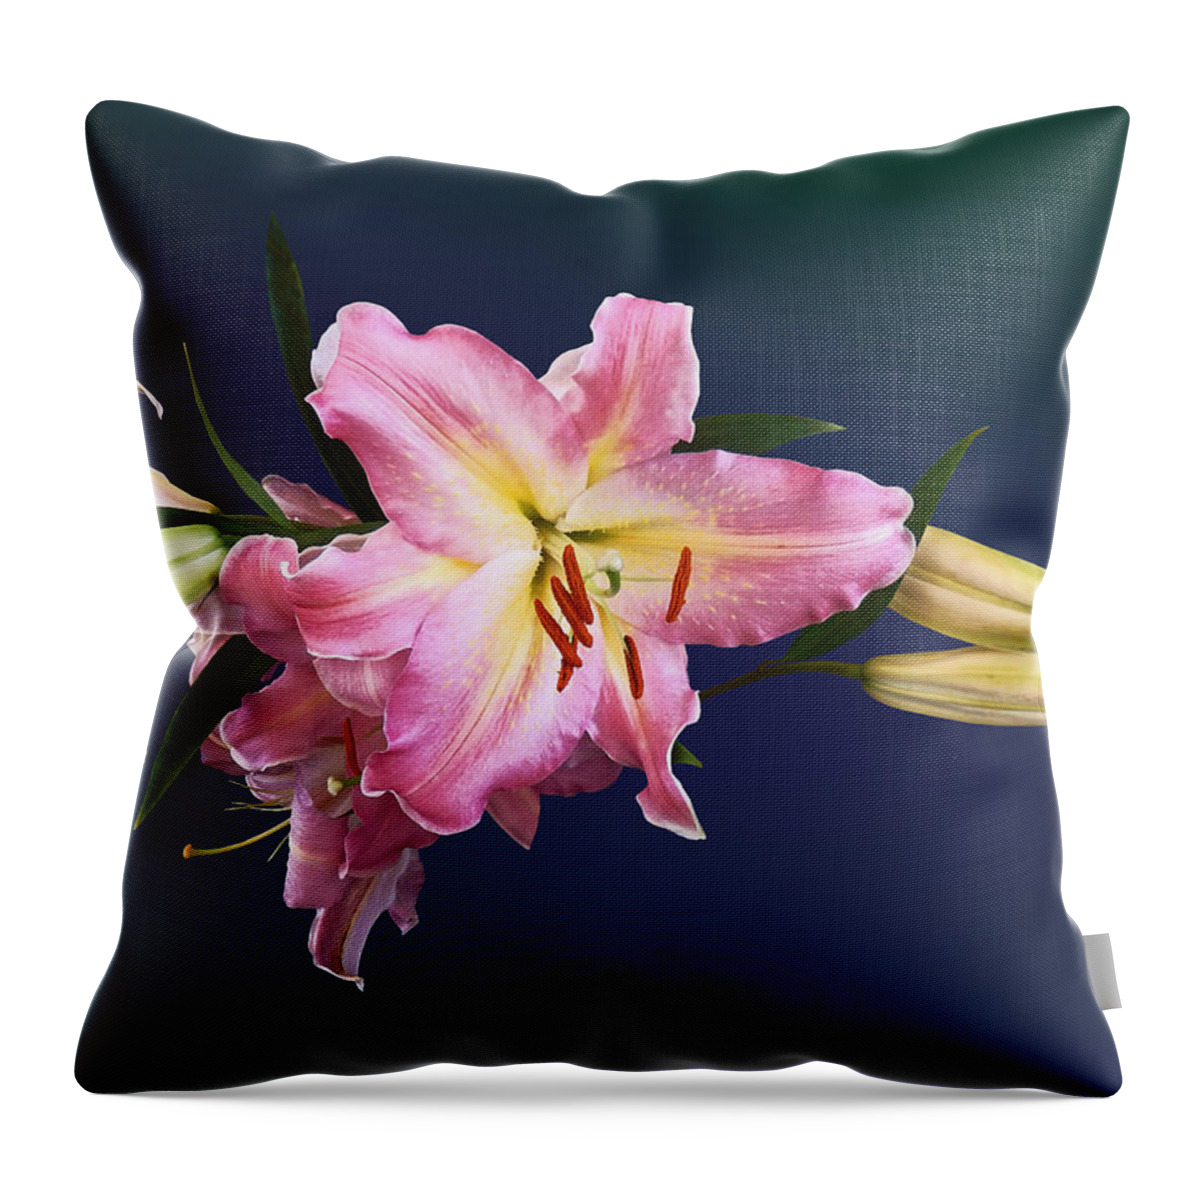  Lily Throw Pillow featuring the photograph Lovely Pink Lilies by Susan Savad